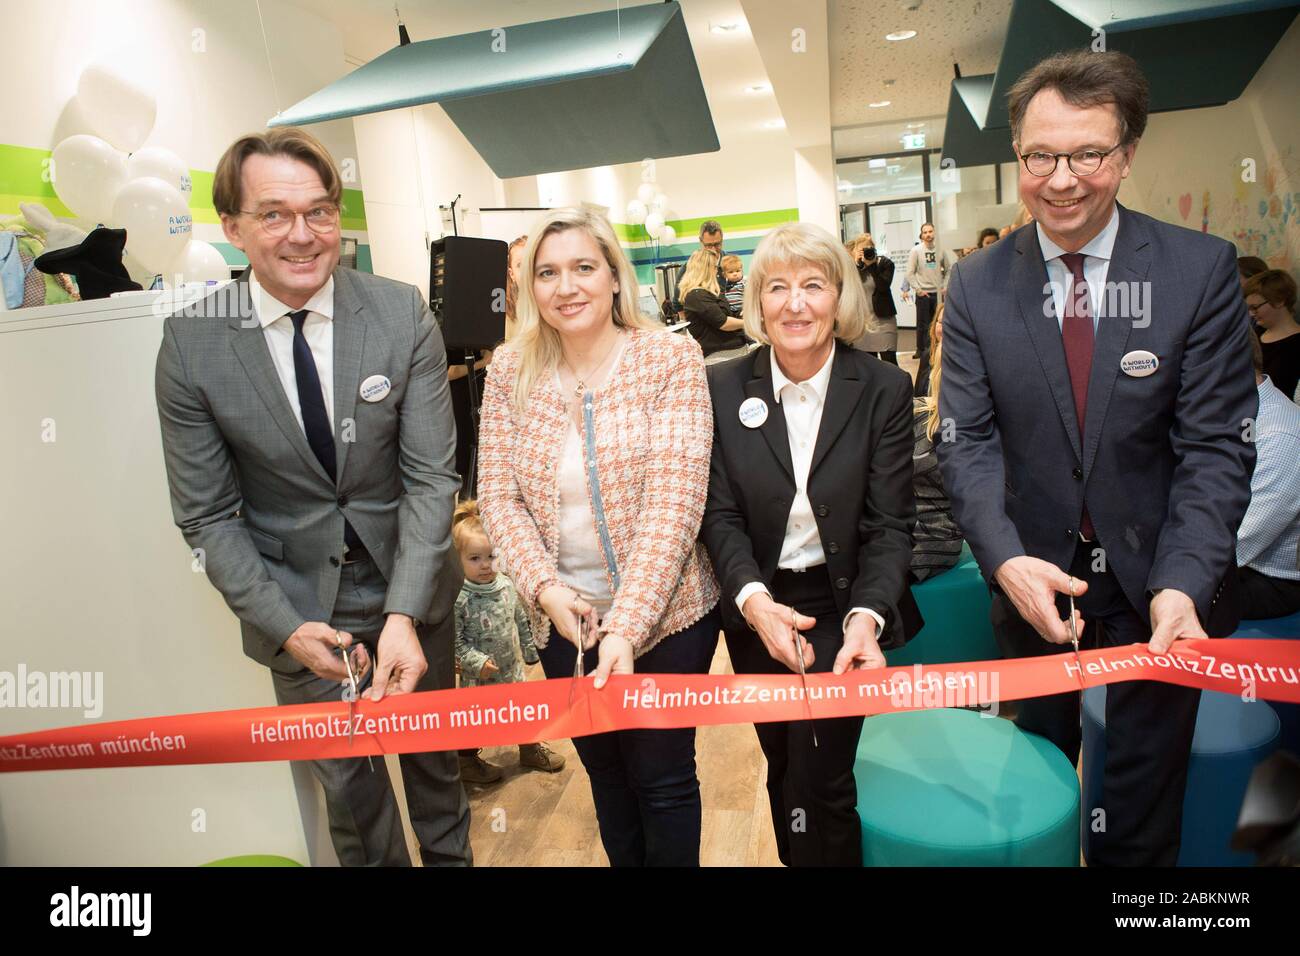 From left to right: Matthias Tschöp, CEO of Helmholtz Zentrum München, Health Minister Melanie Huml, Anette-Gabriele Ziegler, Director of the Institute for Diabetes Research at Helmholtz Zentrum München, and Peter Henningsen, Dean of the Faculty of Medicine at Technische Universität München at the opening of the new study centre at the Institute for Diabetes Research at Helmholtz Zentrum München. [automated translation] Stock Photo